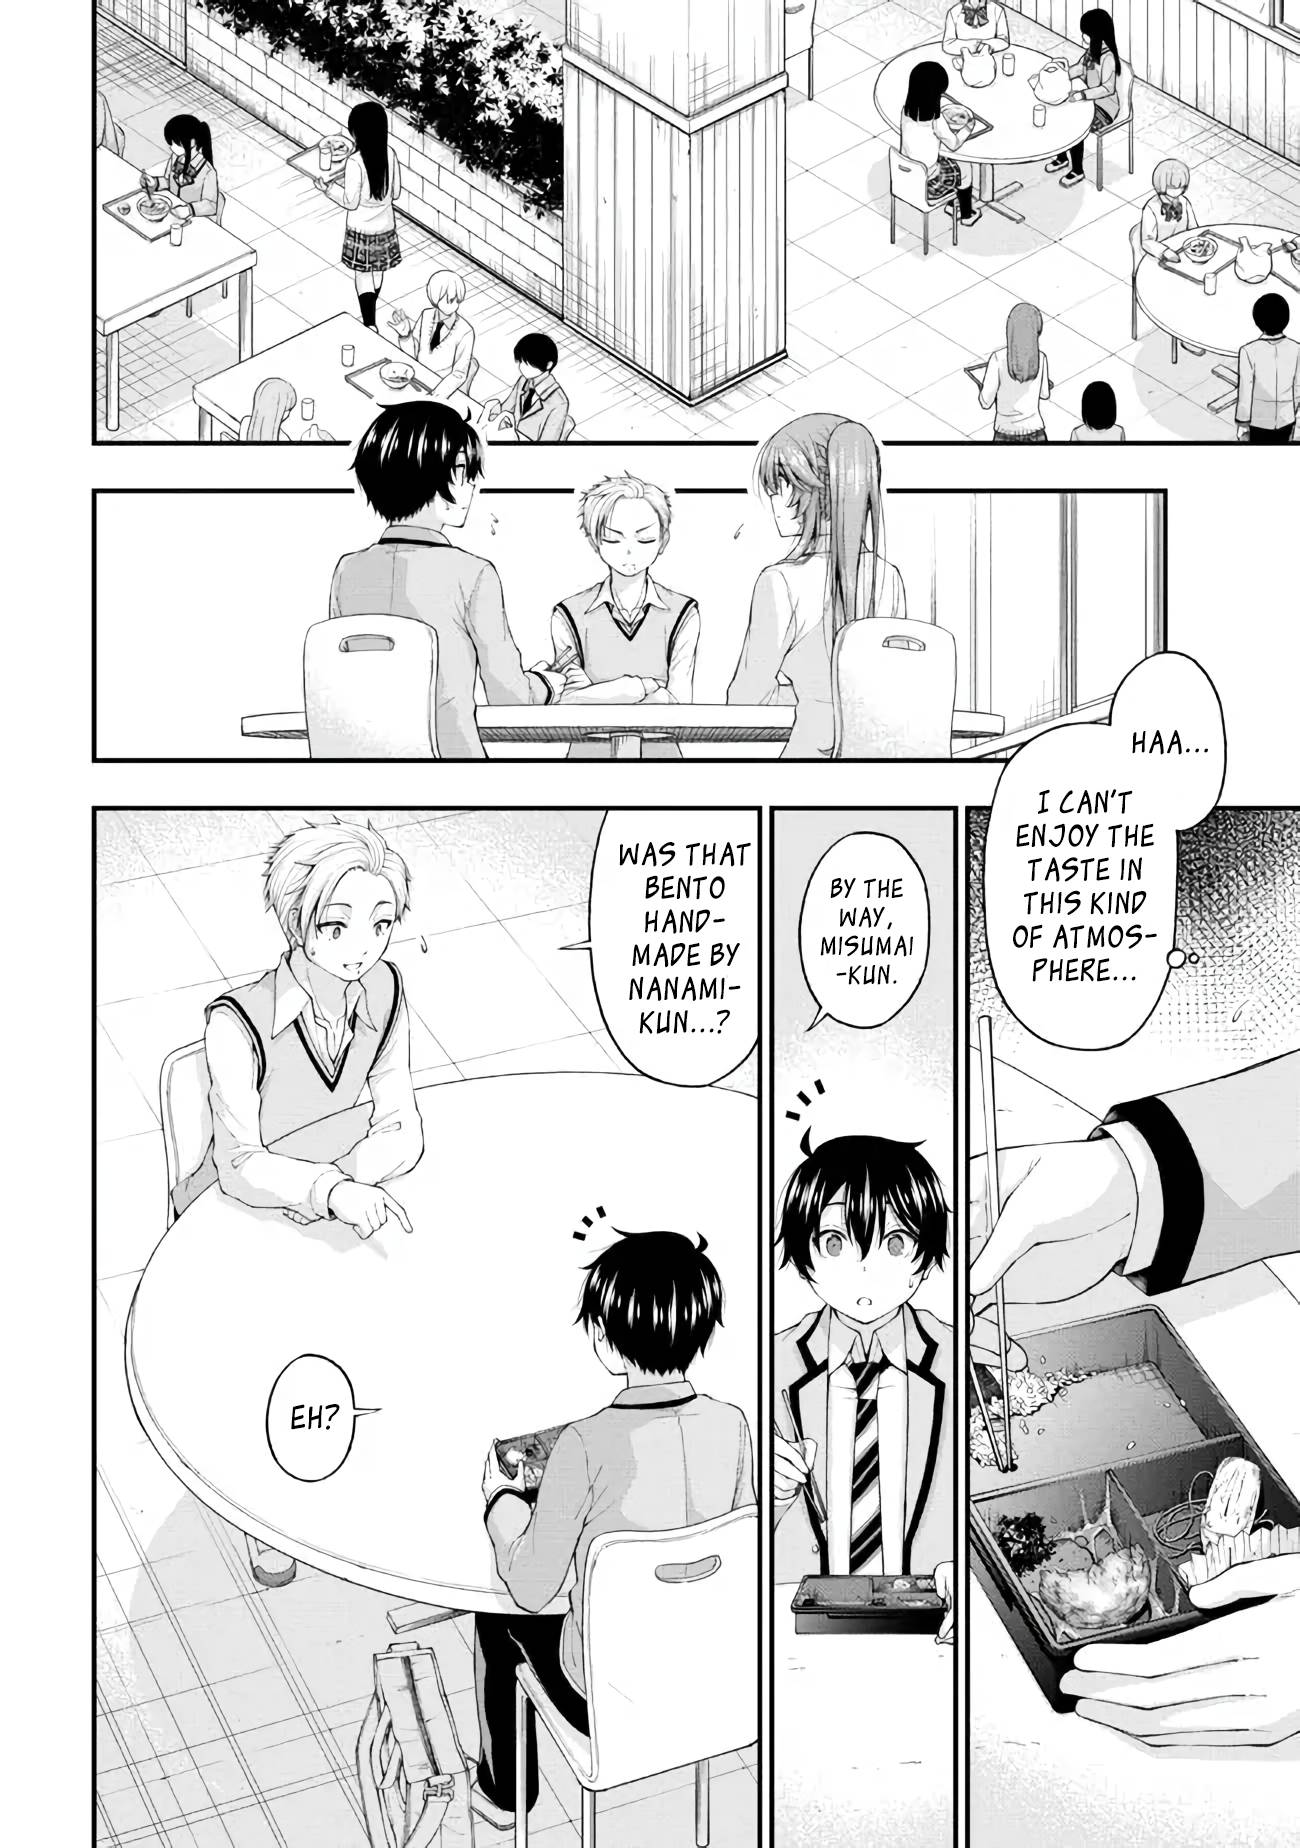 The Gal Who Was Meant to Confess to Me as a Game Punishment - chapter 6 - #6